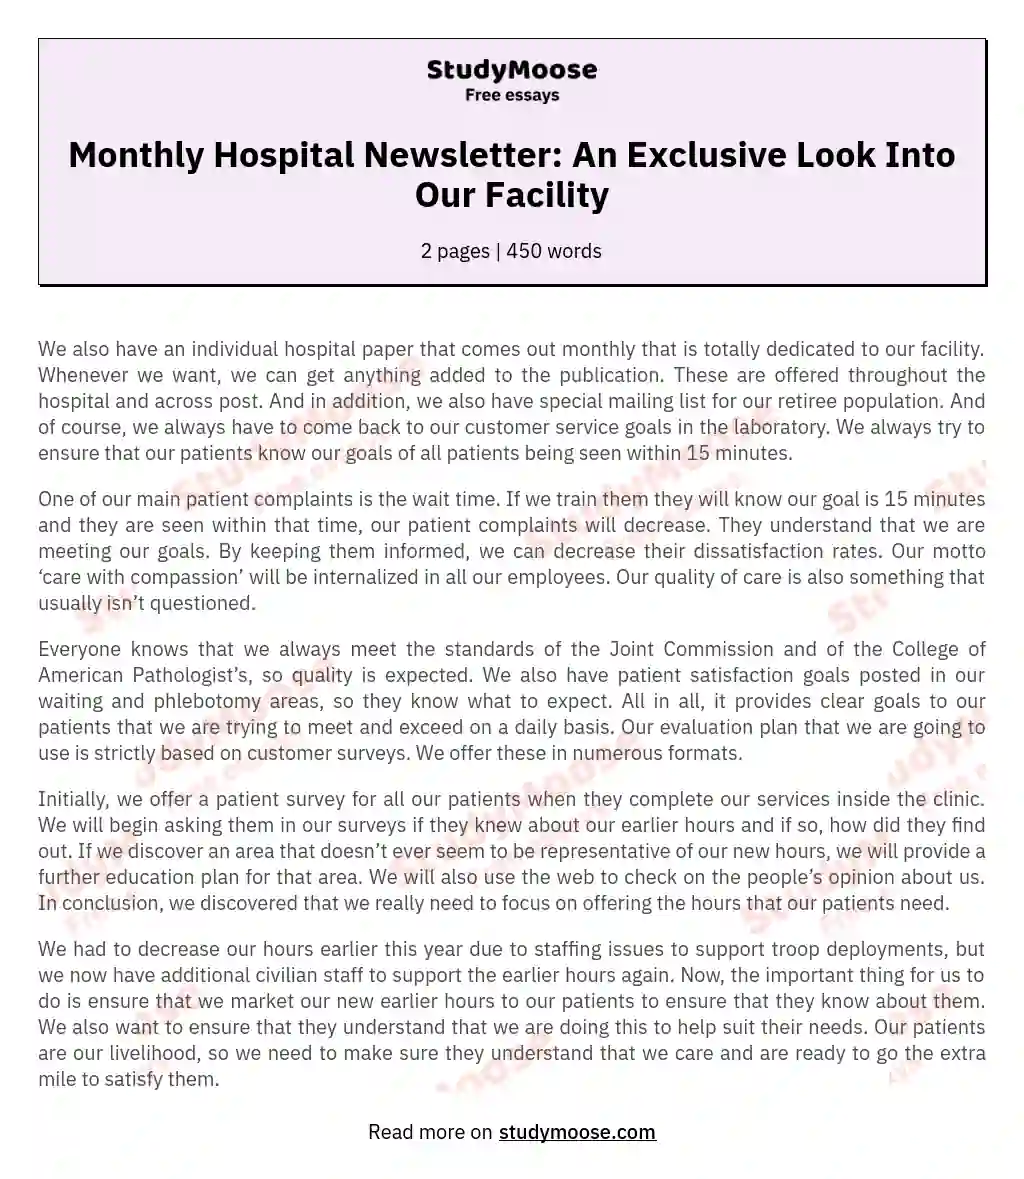 Monthly Hospital Newsletter: An Exclusive Look Into Our Facility essay